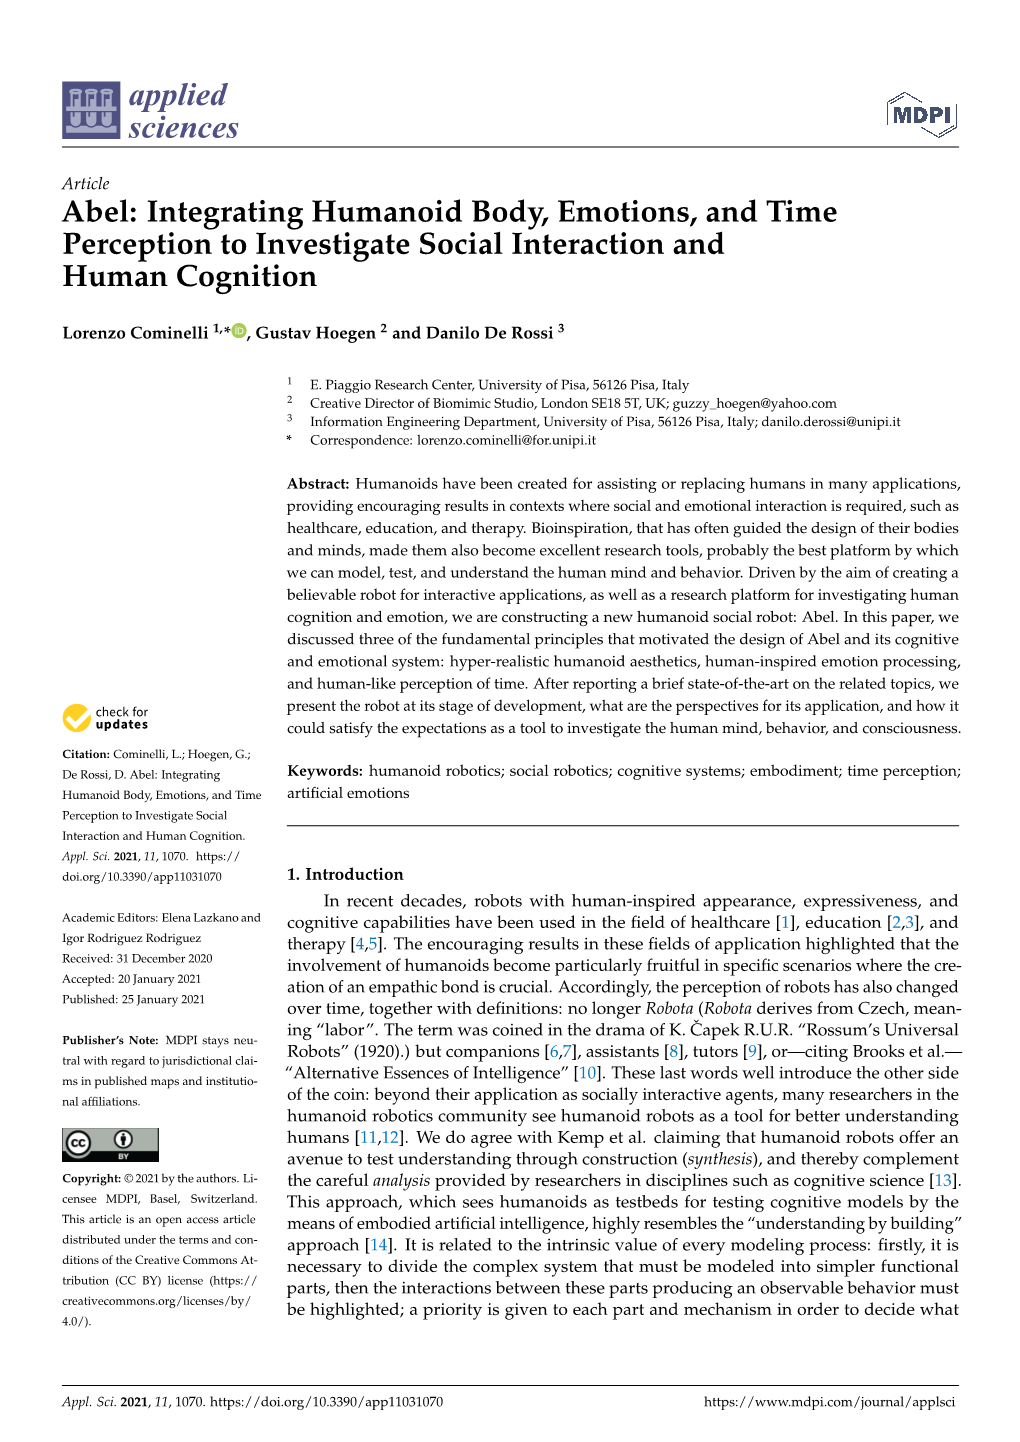 Integrating Humanoid Body, Emotions, and Time Perception to Investigate Social Interaction and Human Cognition